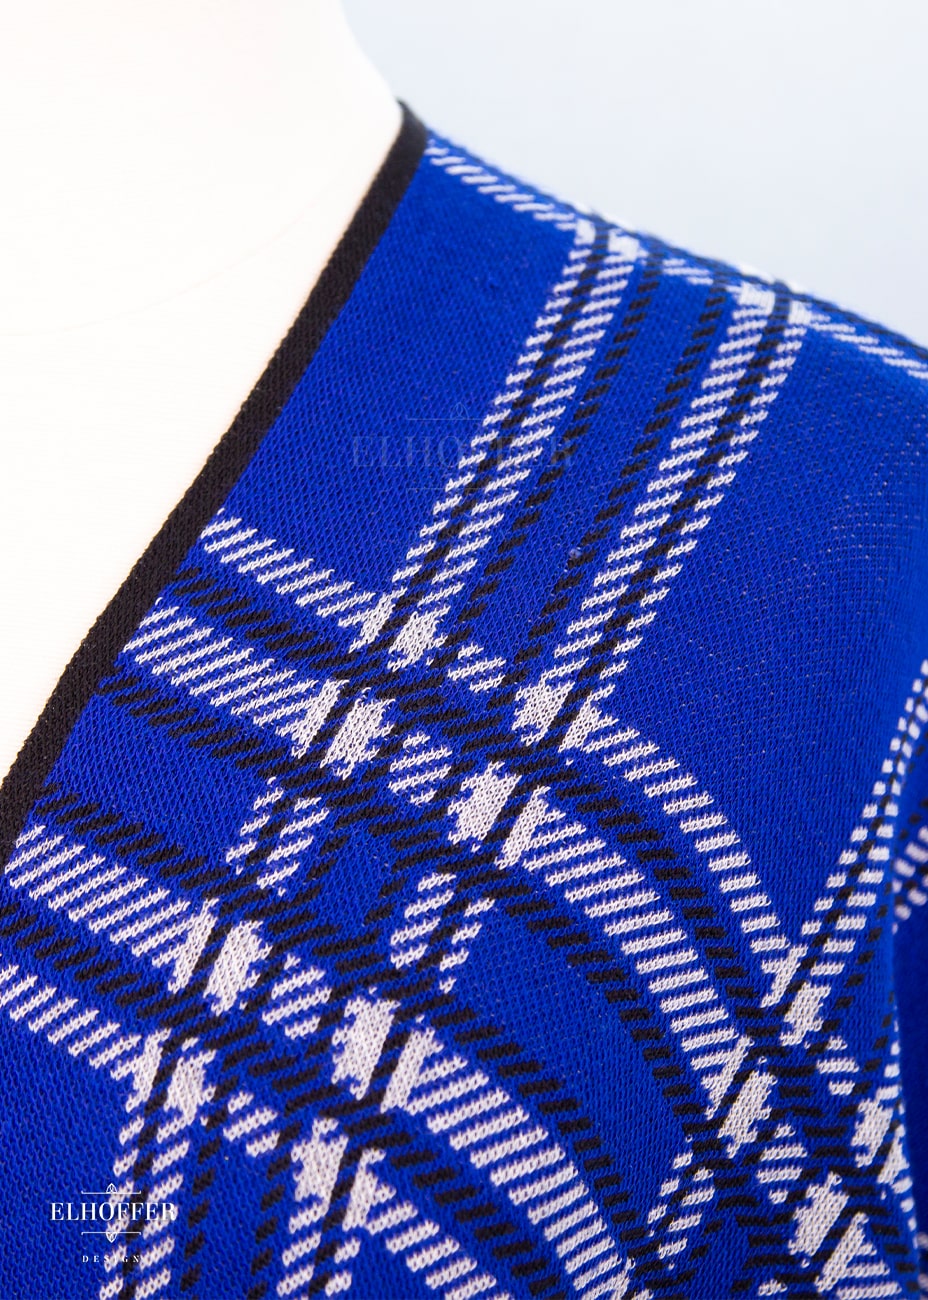 A close up of the knit texture and tartan pattern.